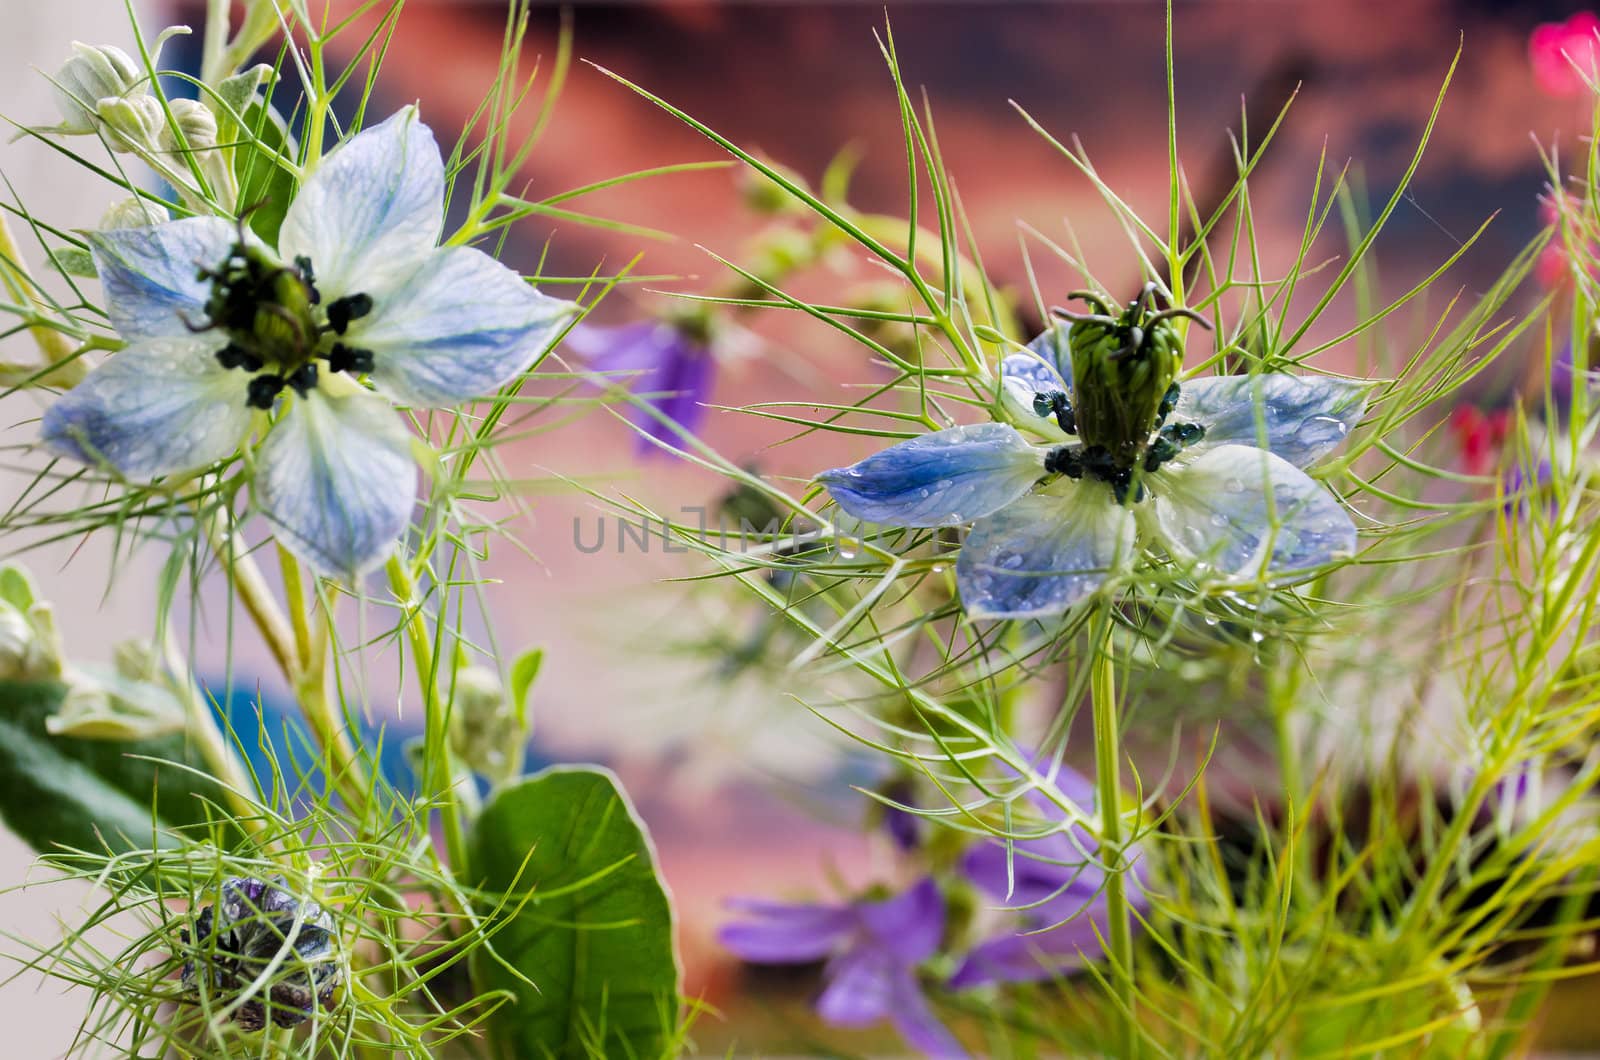 Love in a mist by Jez22